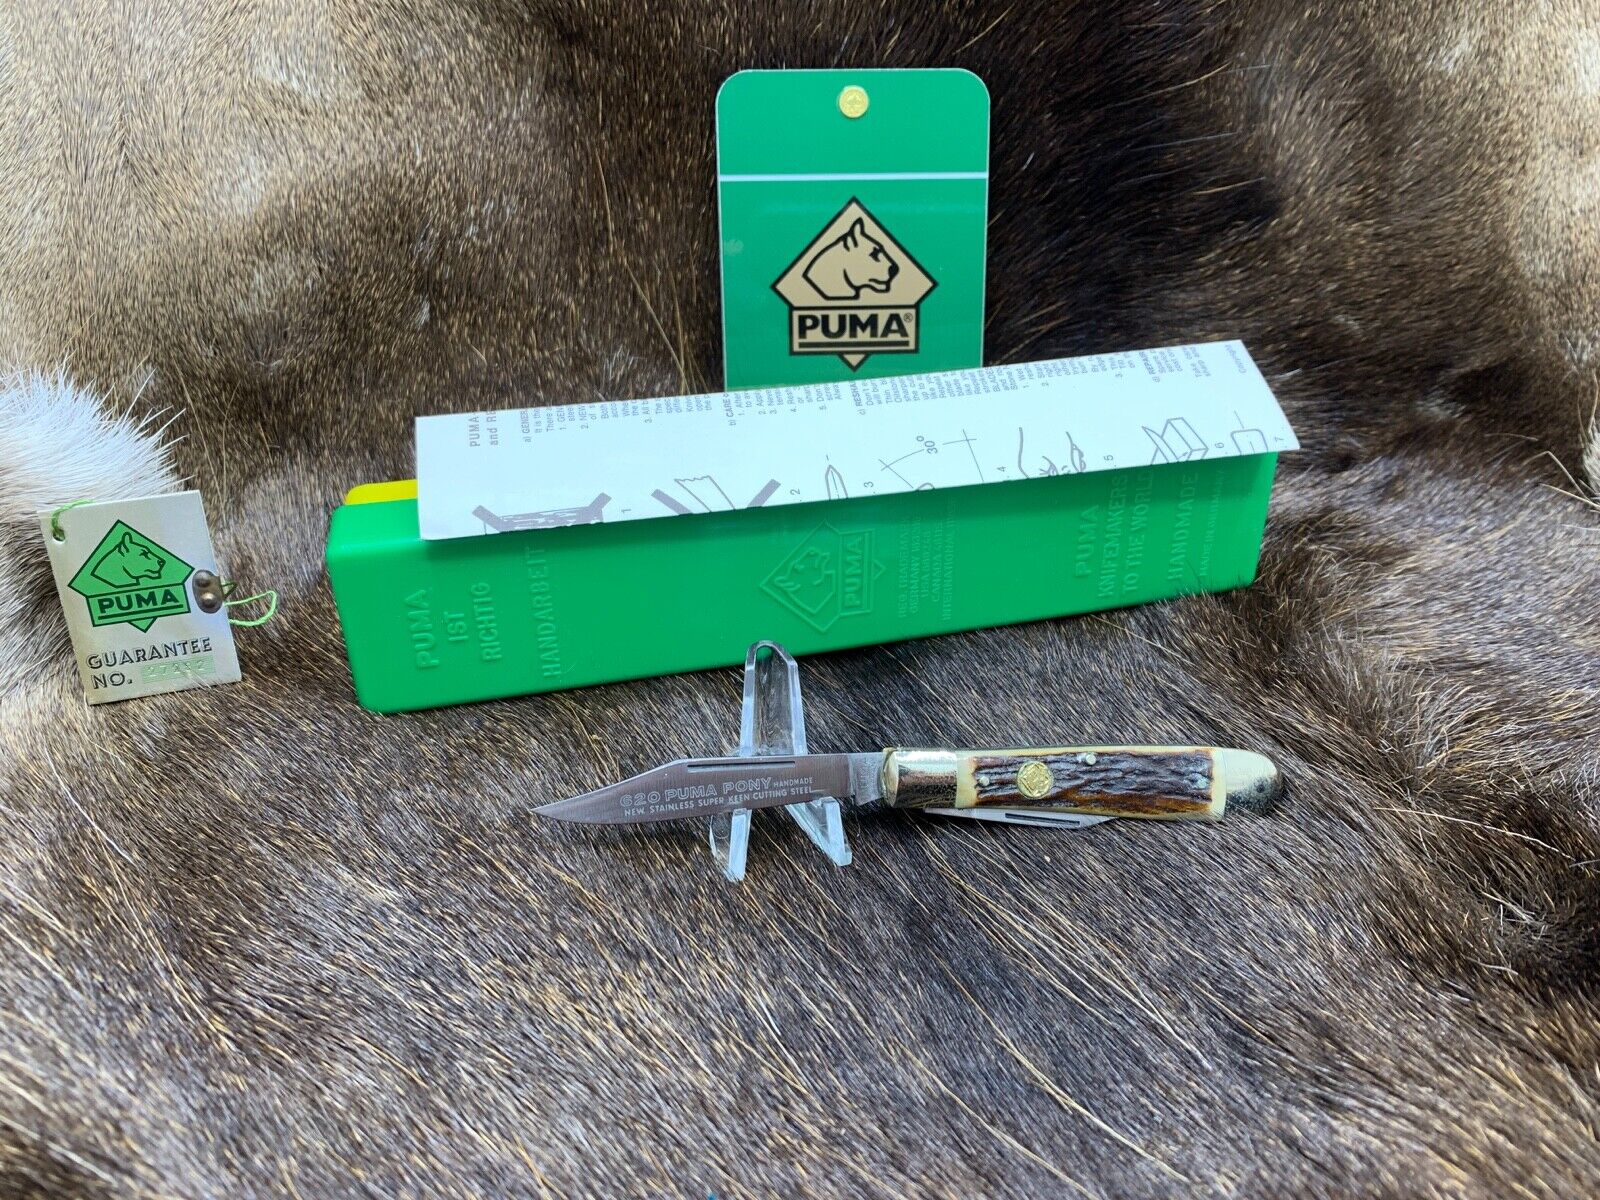  1982 Puma 620 Pony Knife With Stag Handles In Green/ Yellow Factory Box & Tag